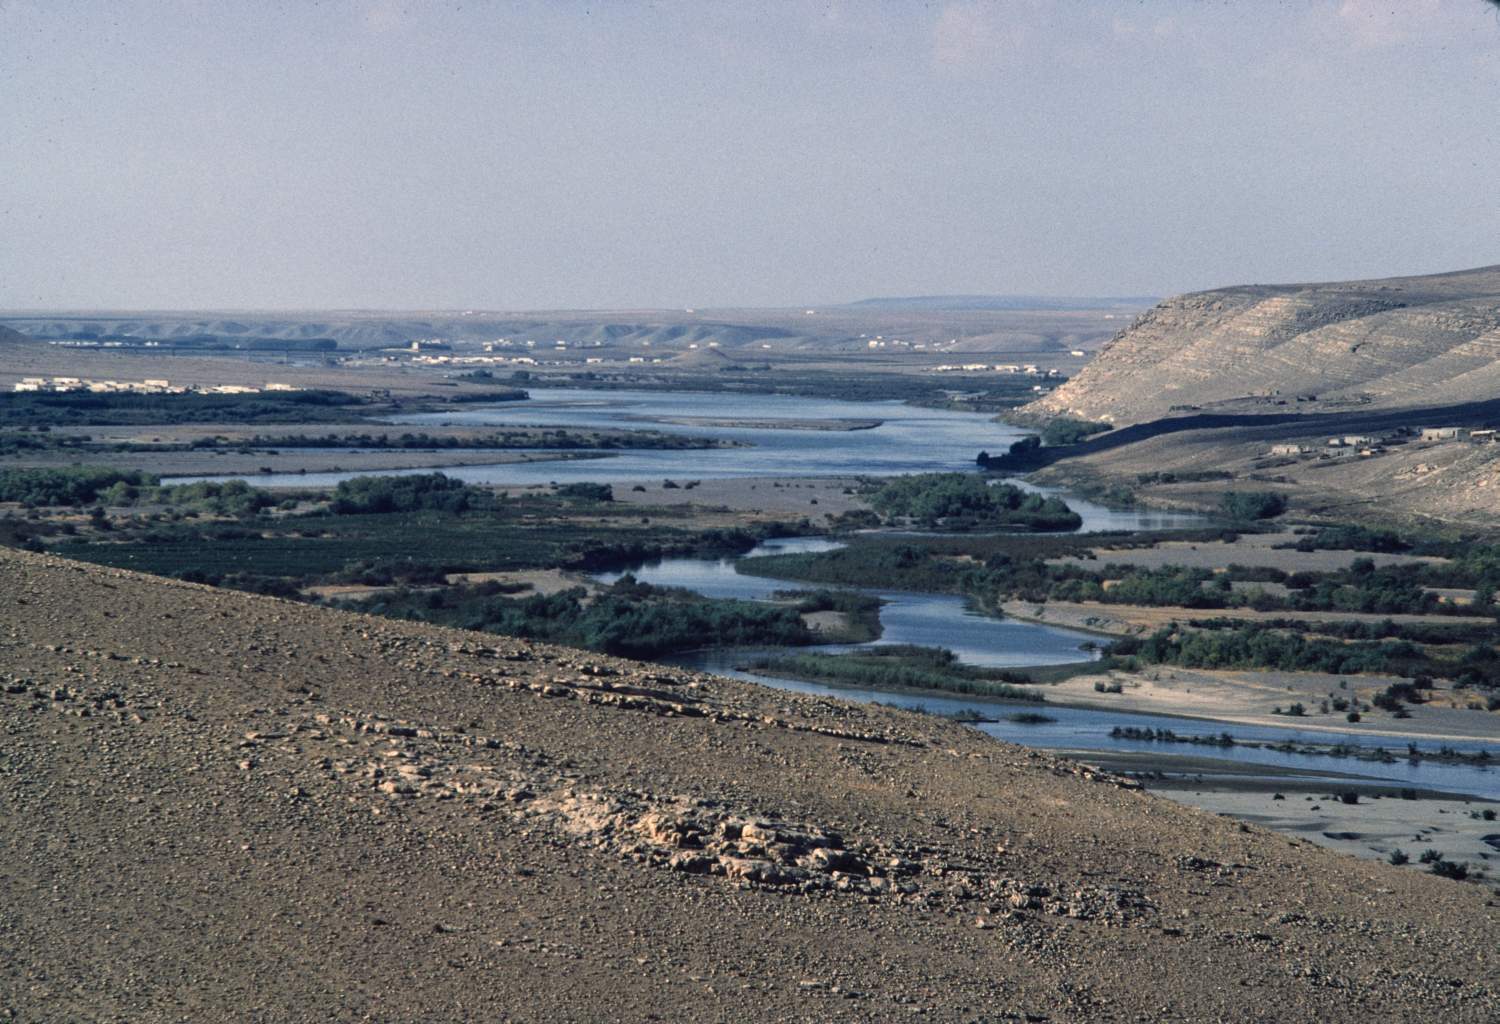 View of Euphrates River, looking upstream, from Qal'a Najm.